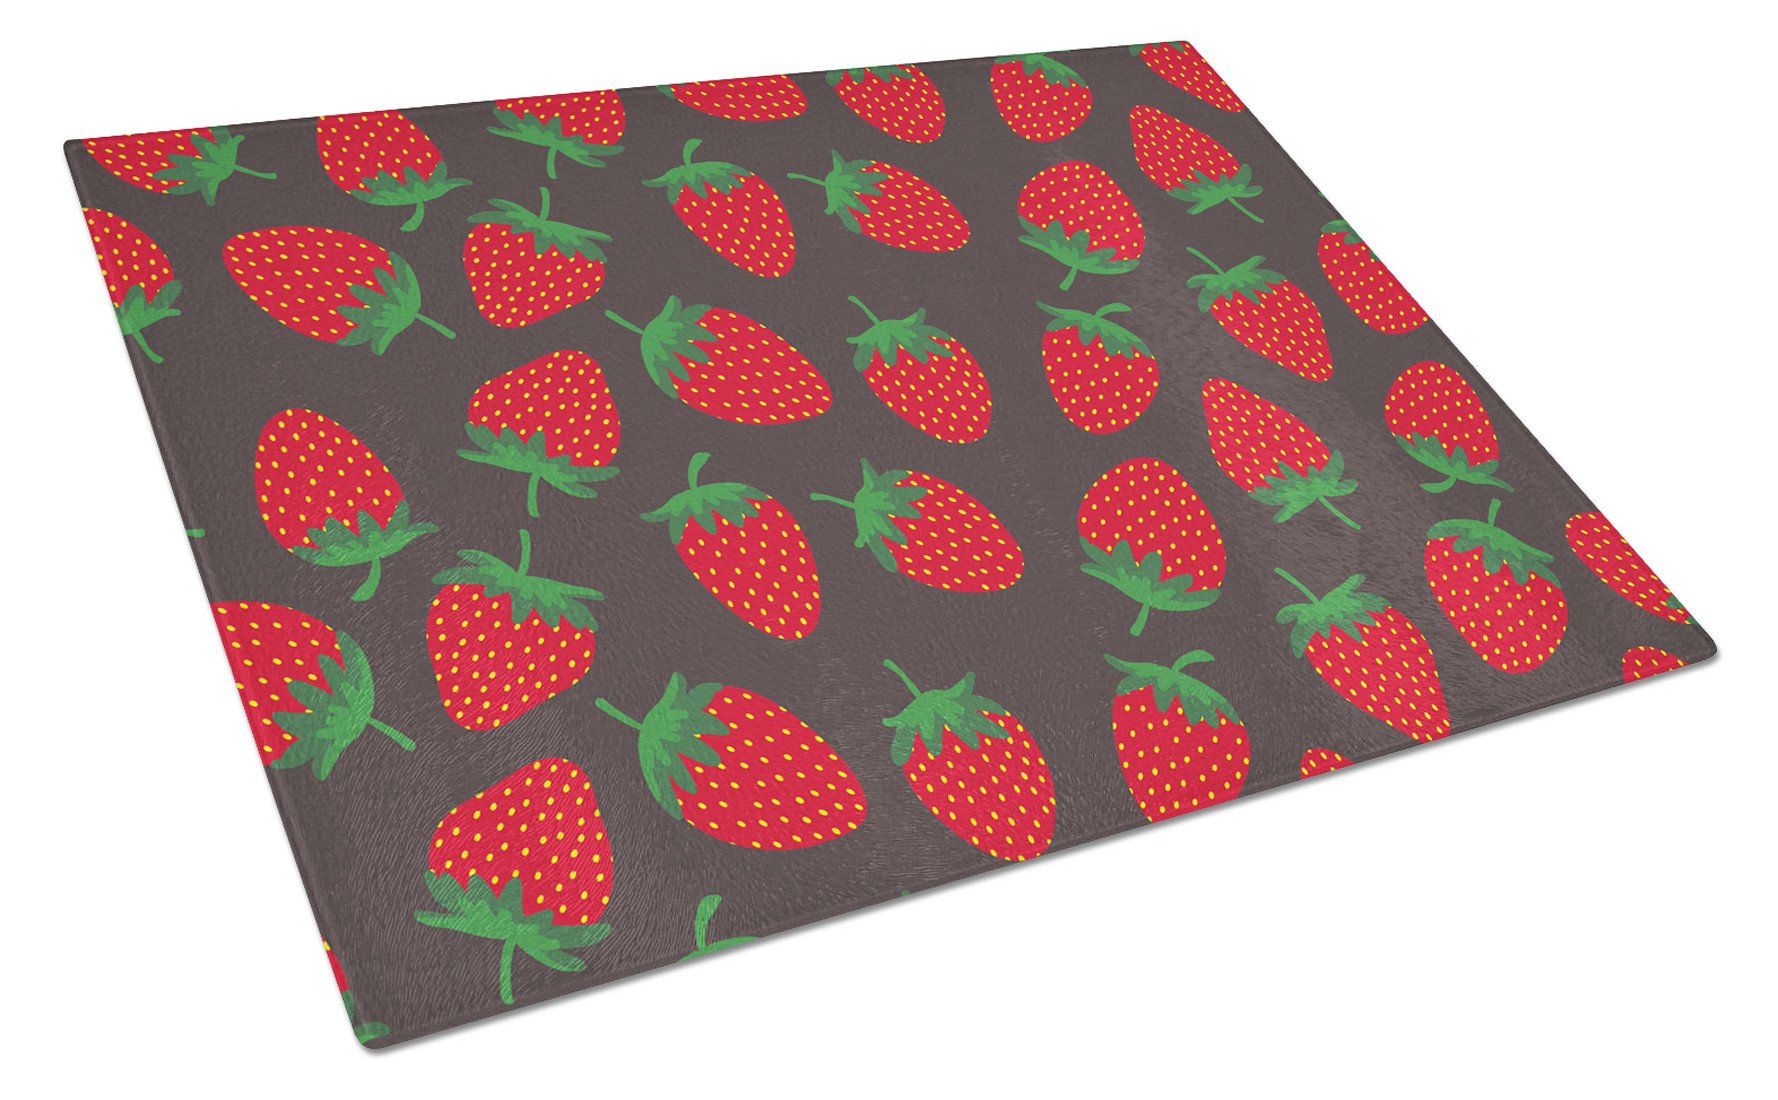 Strawberries on Gray Glass Cutting Board Large BB5137LCB by Caroline's Treasures